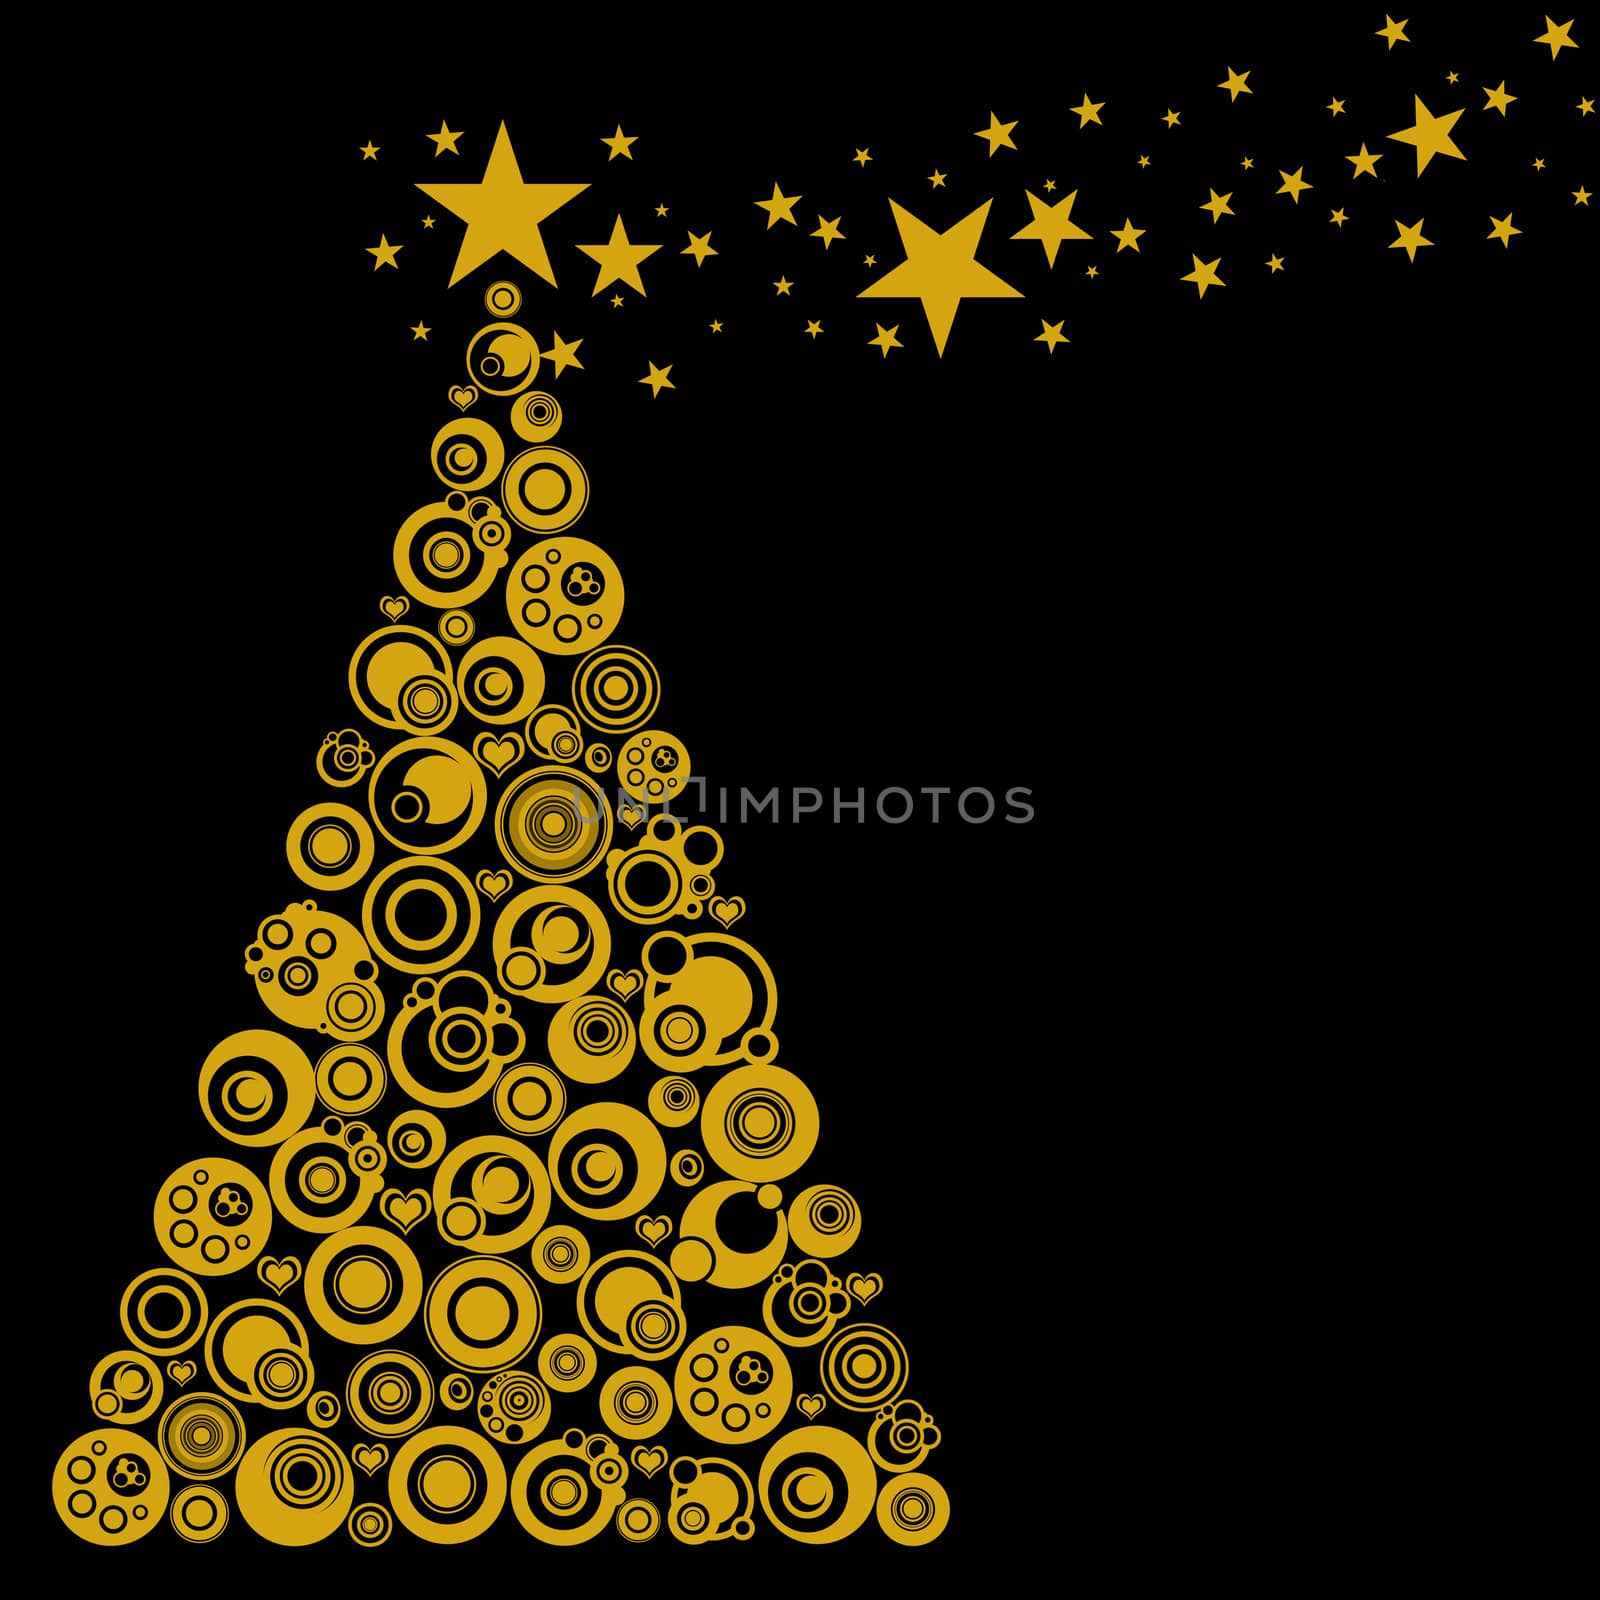 Abstract Christmas Tree with Circles Stars and Hearts Illustration Gold Black